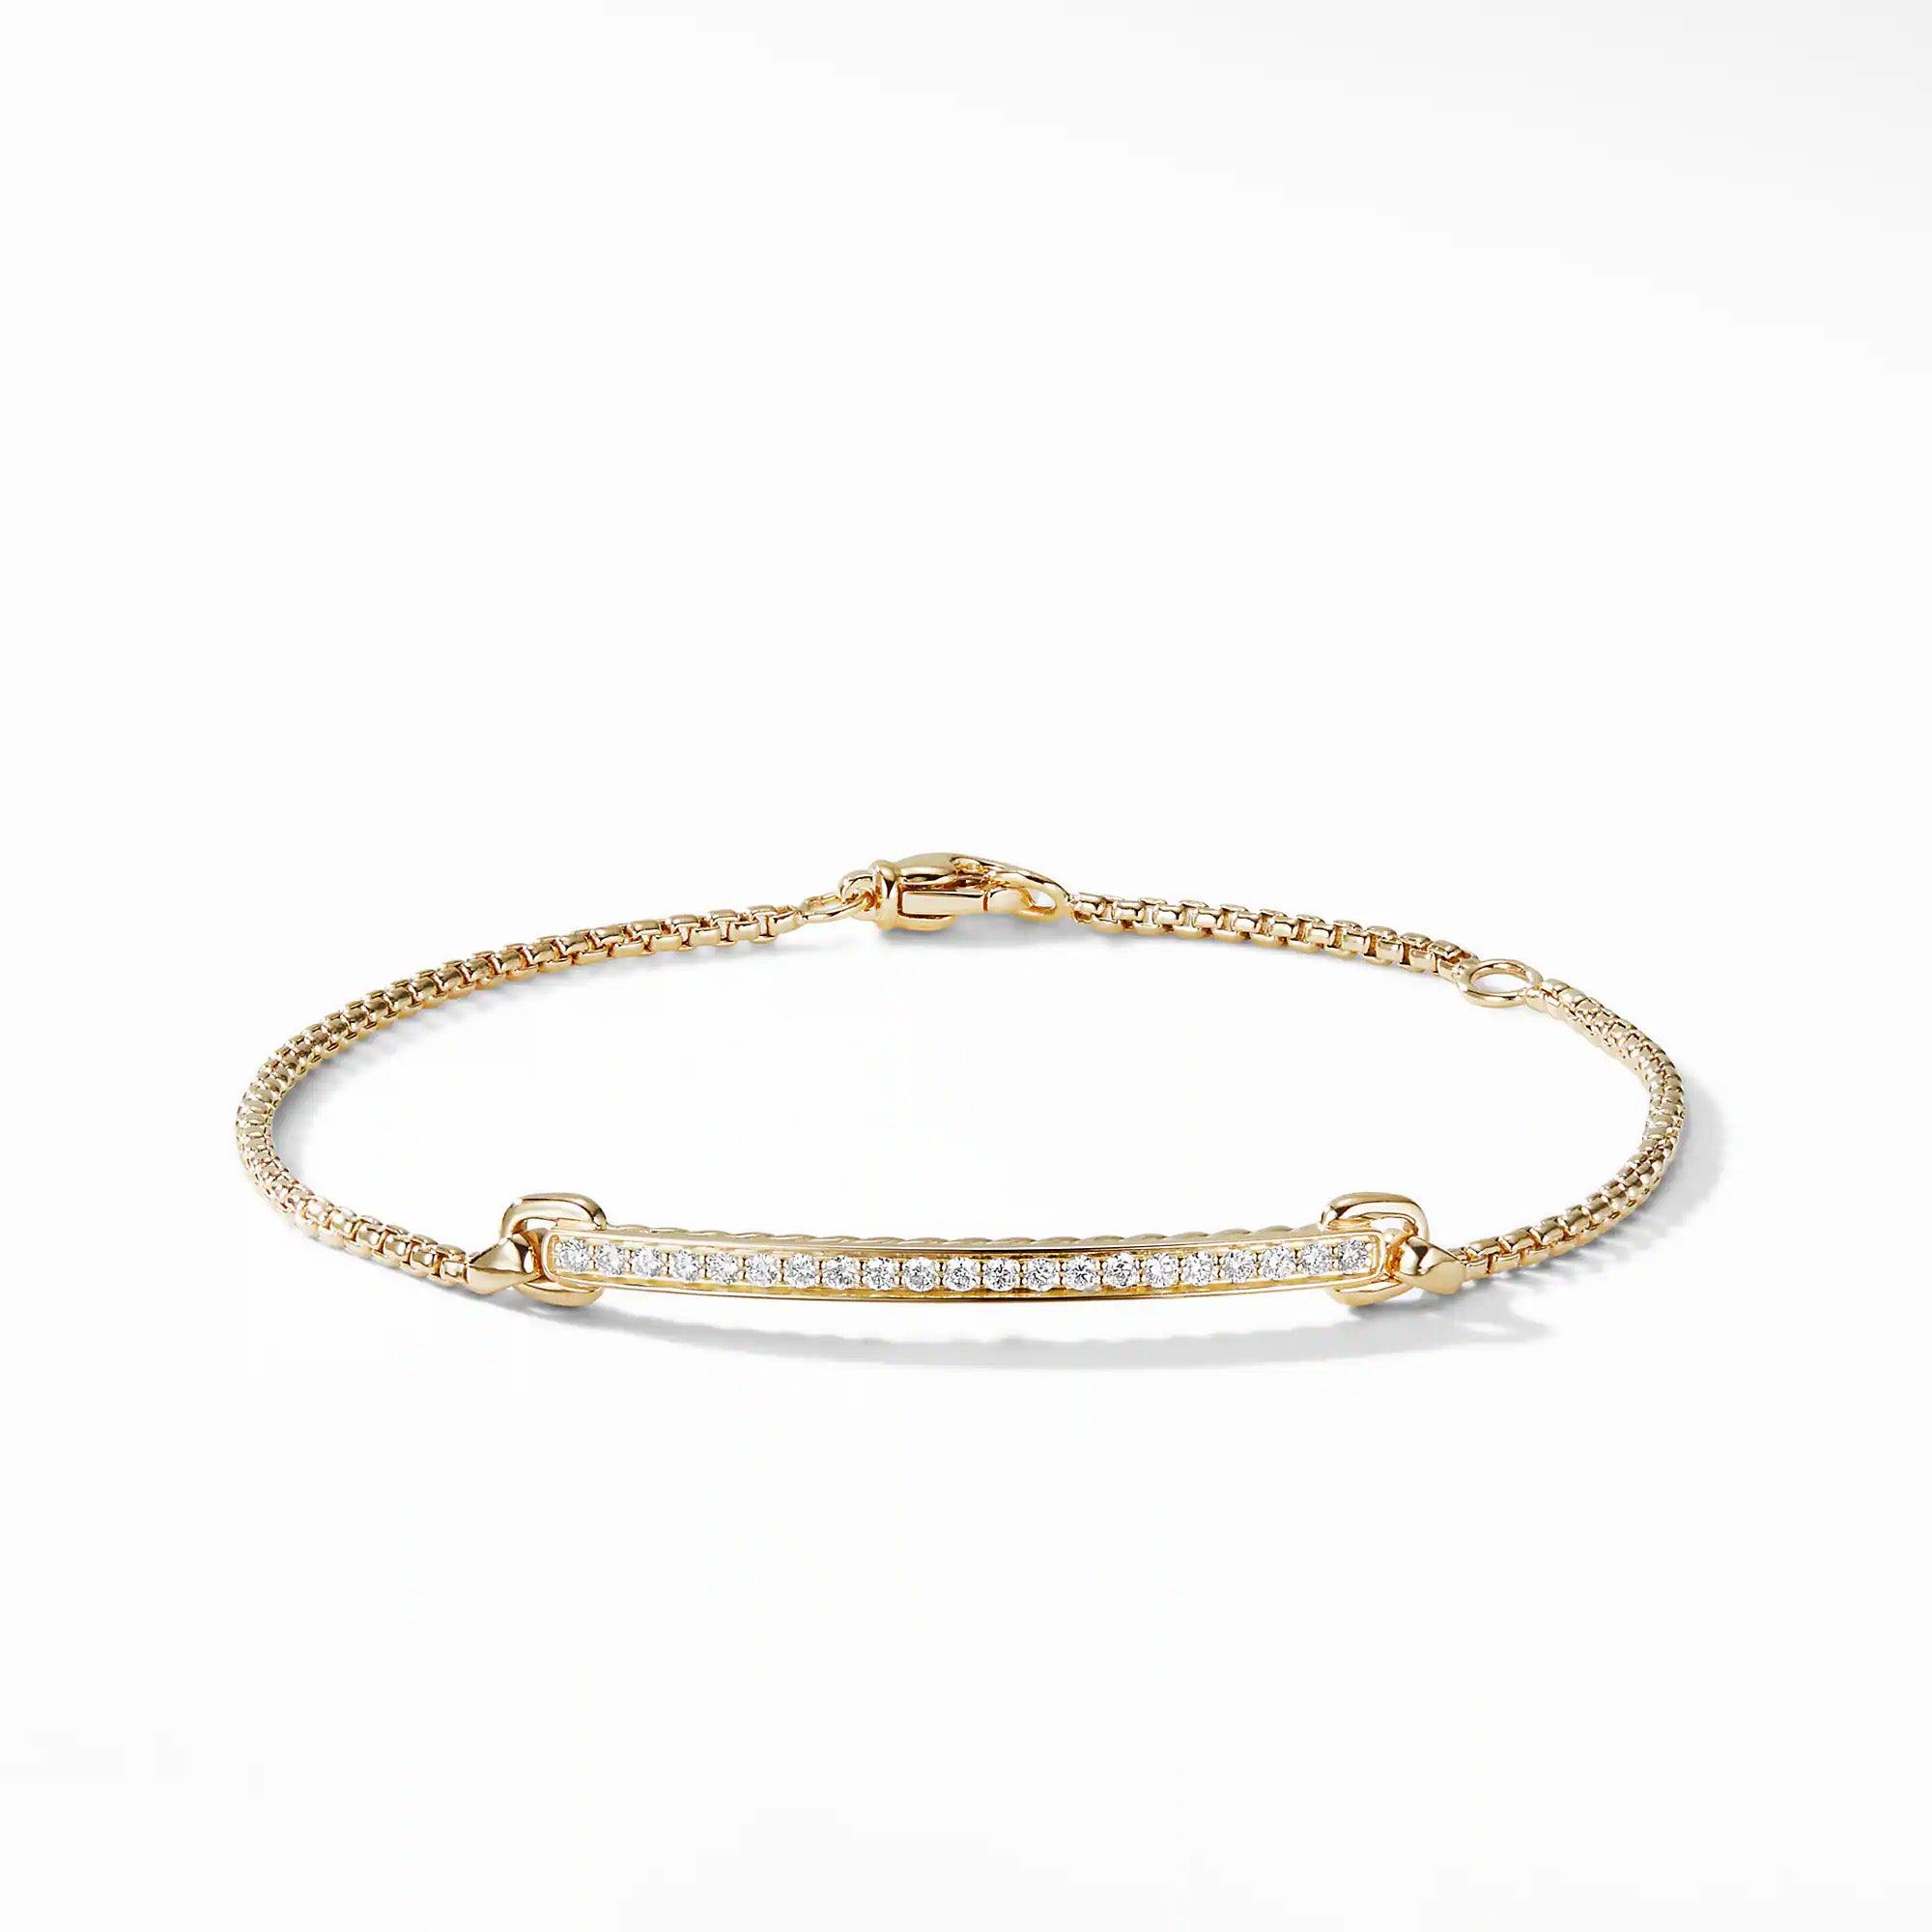 Petite Pave Station Chain Bracelet with Diamonds in 18K Gold